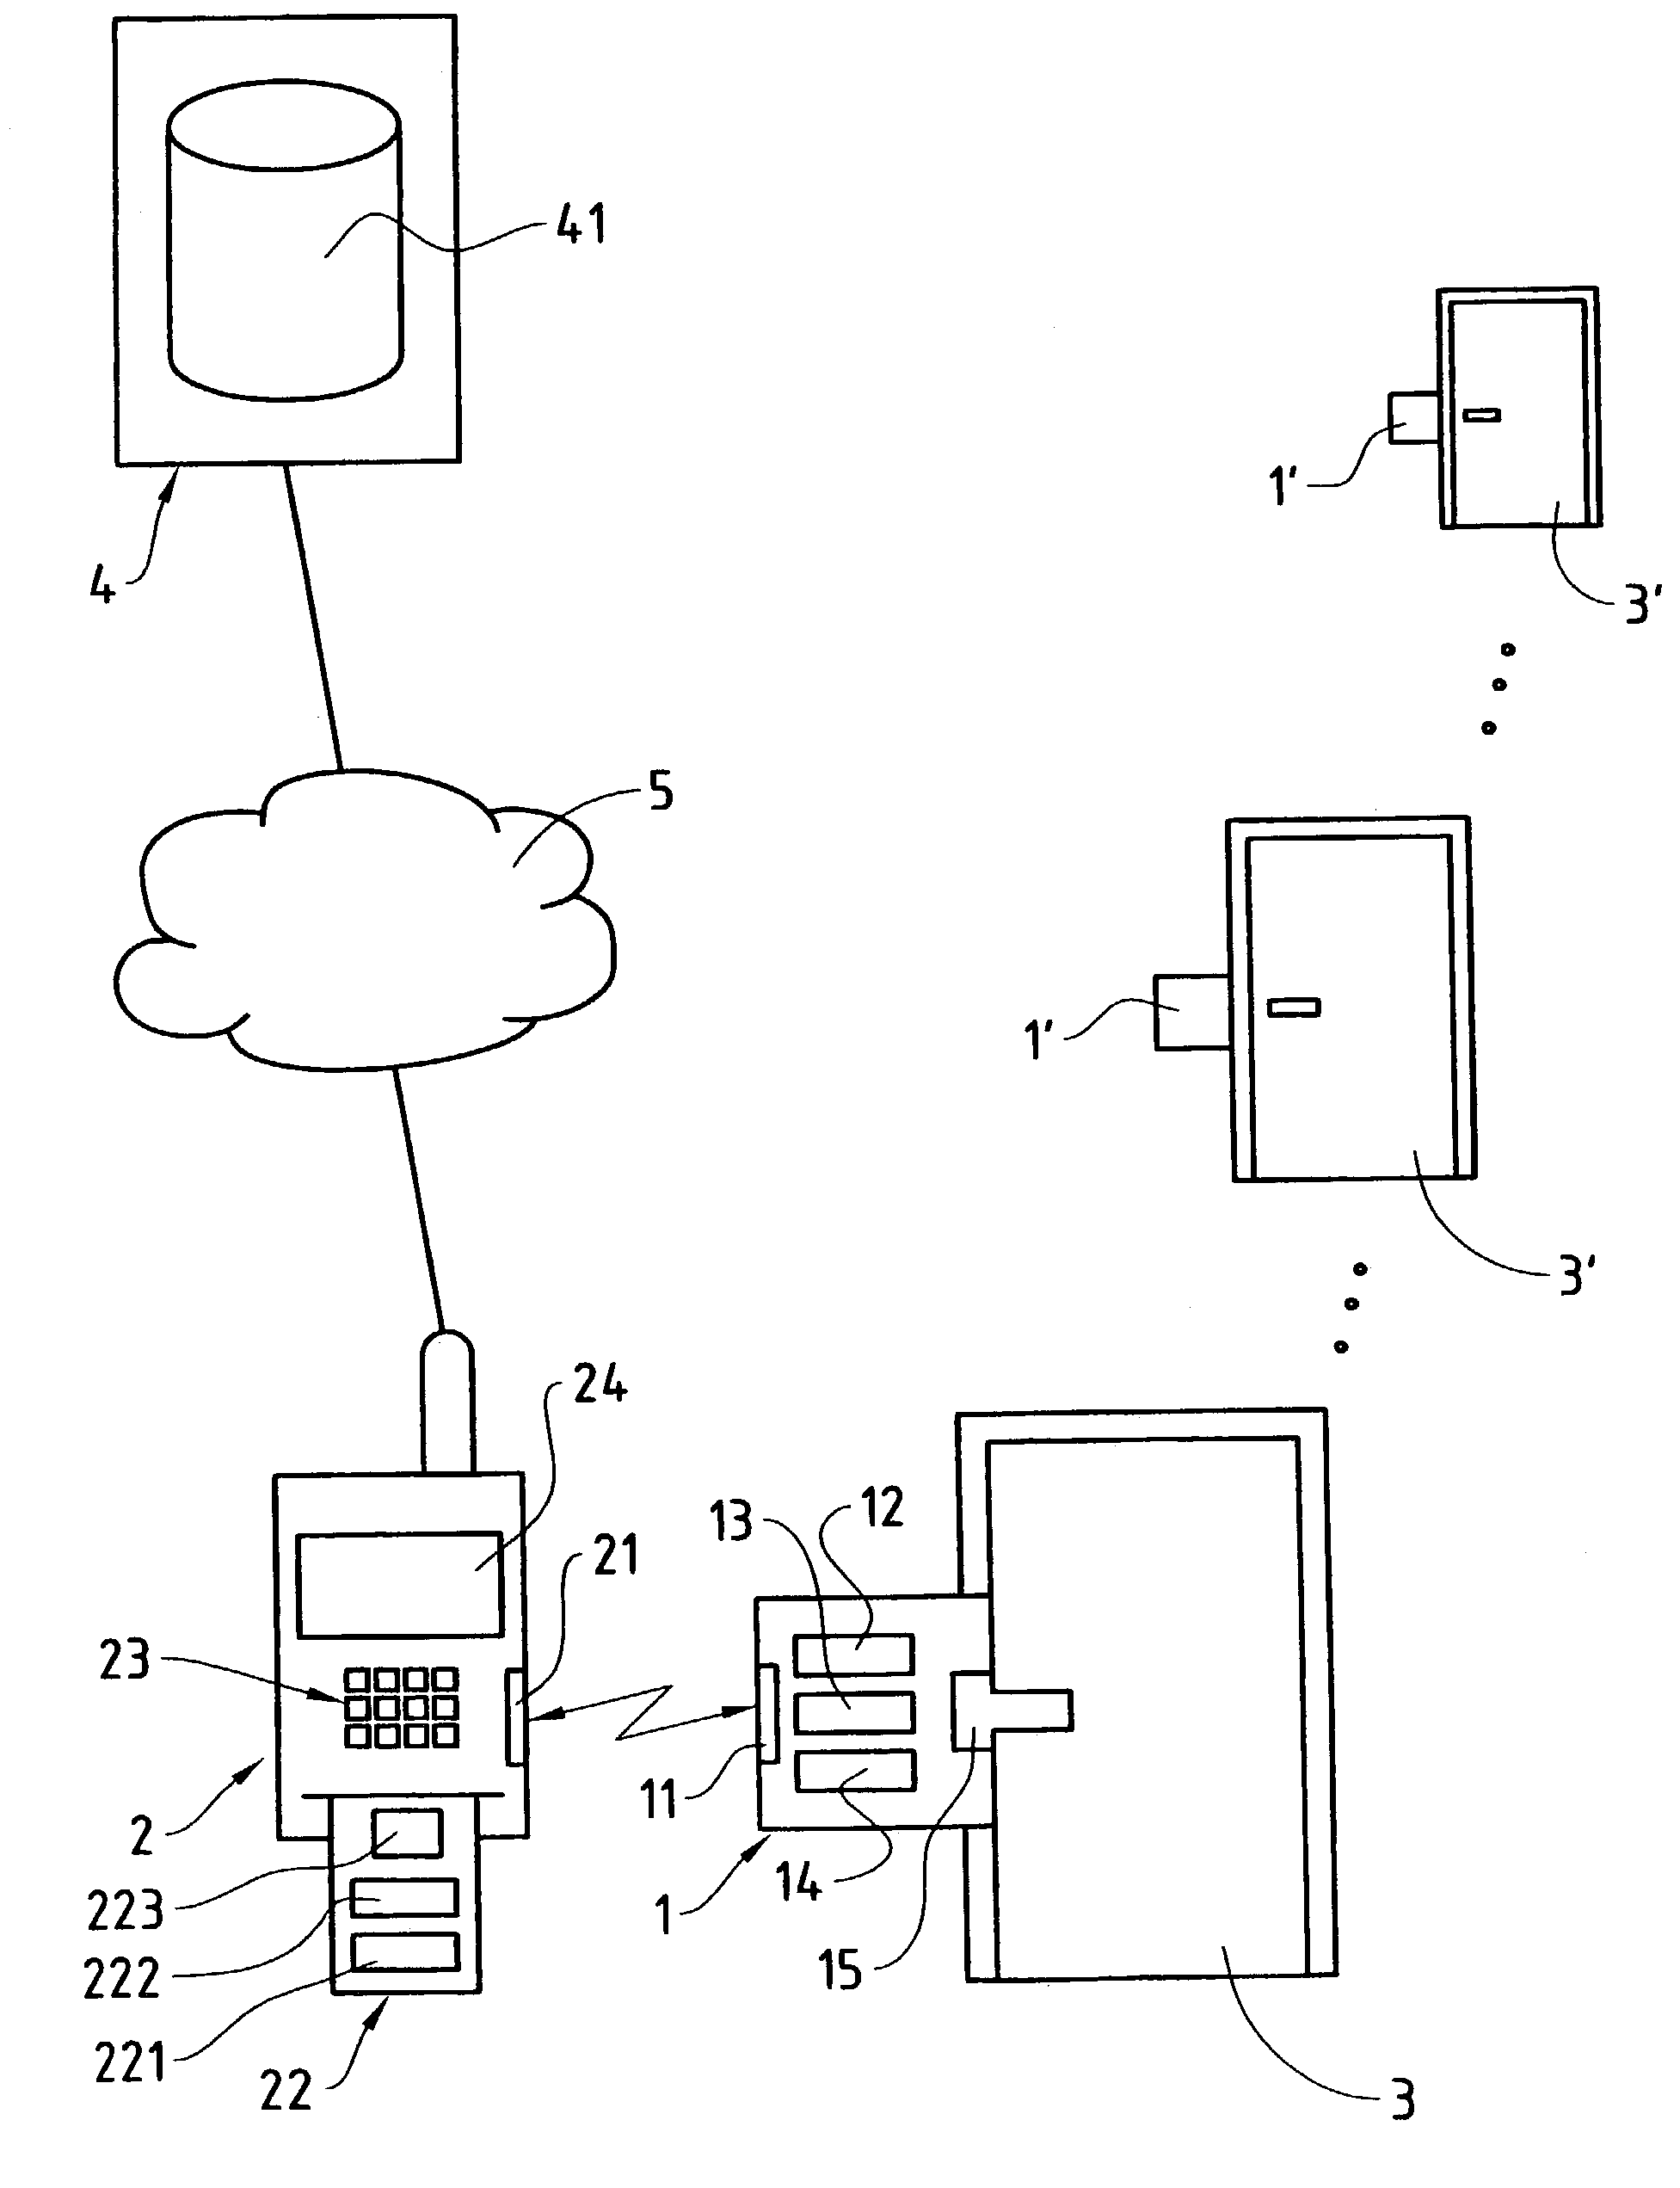 Access control system, access control method and devices suitable therefor